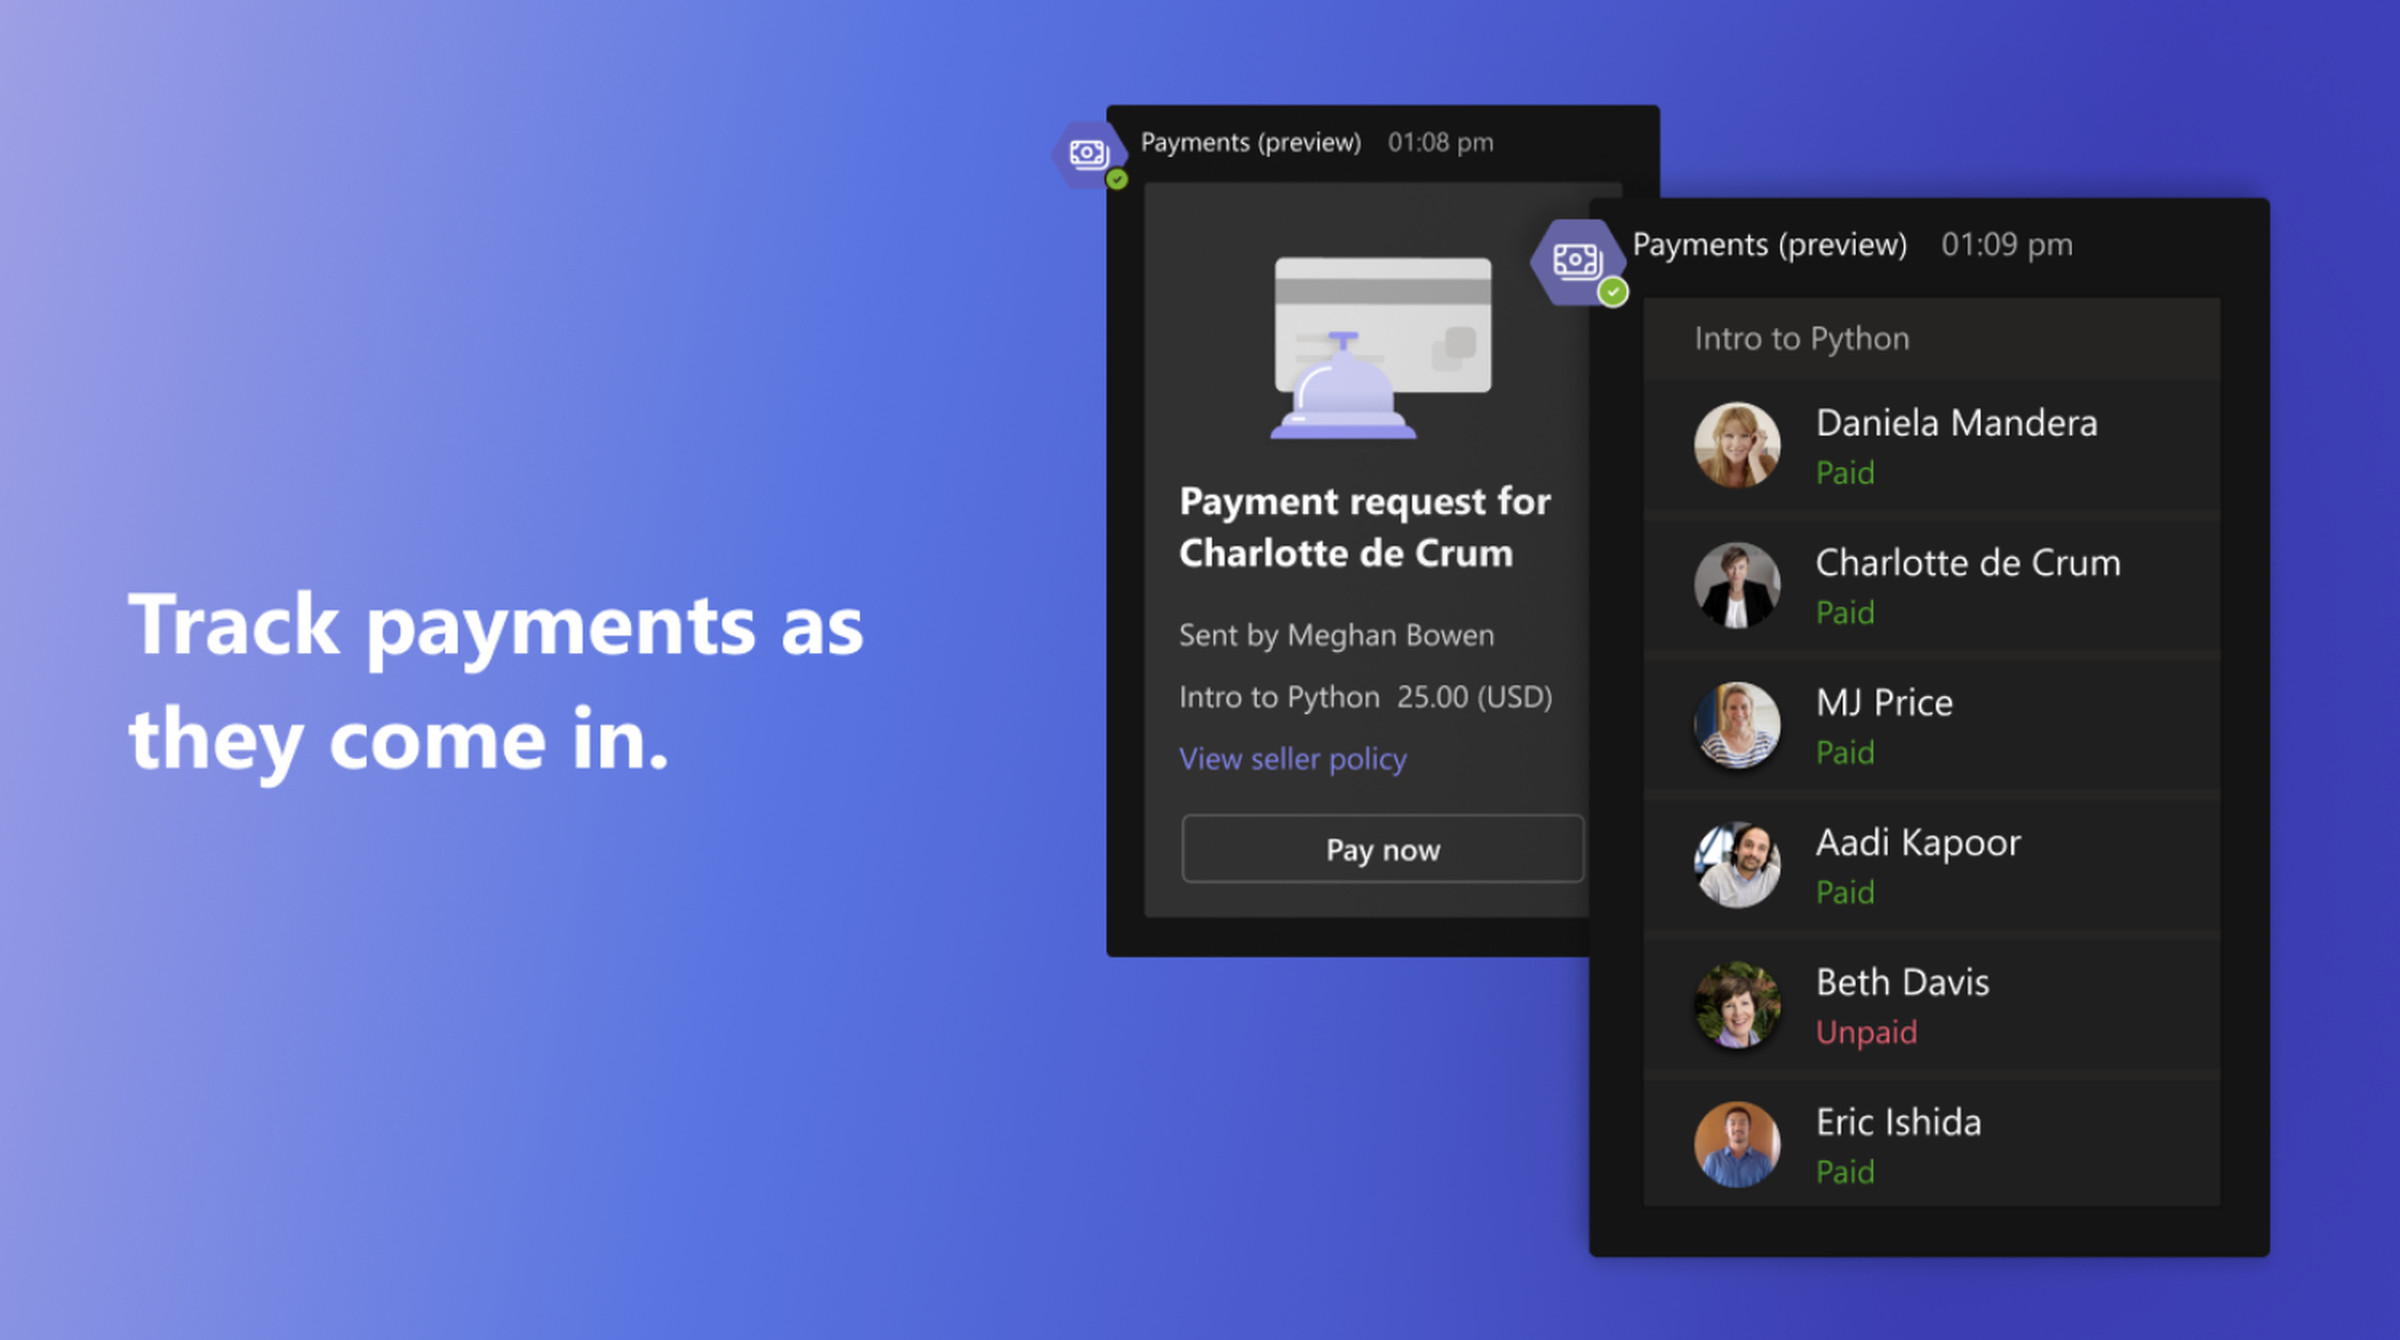 You can track who has paid for the meeting inside the payments app.